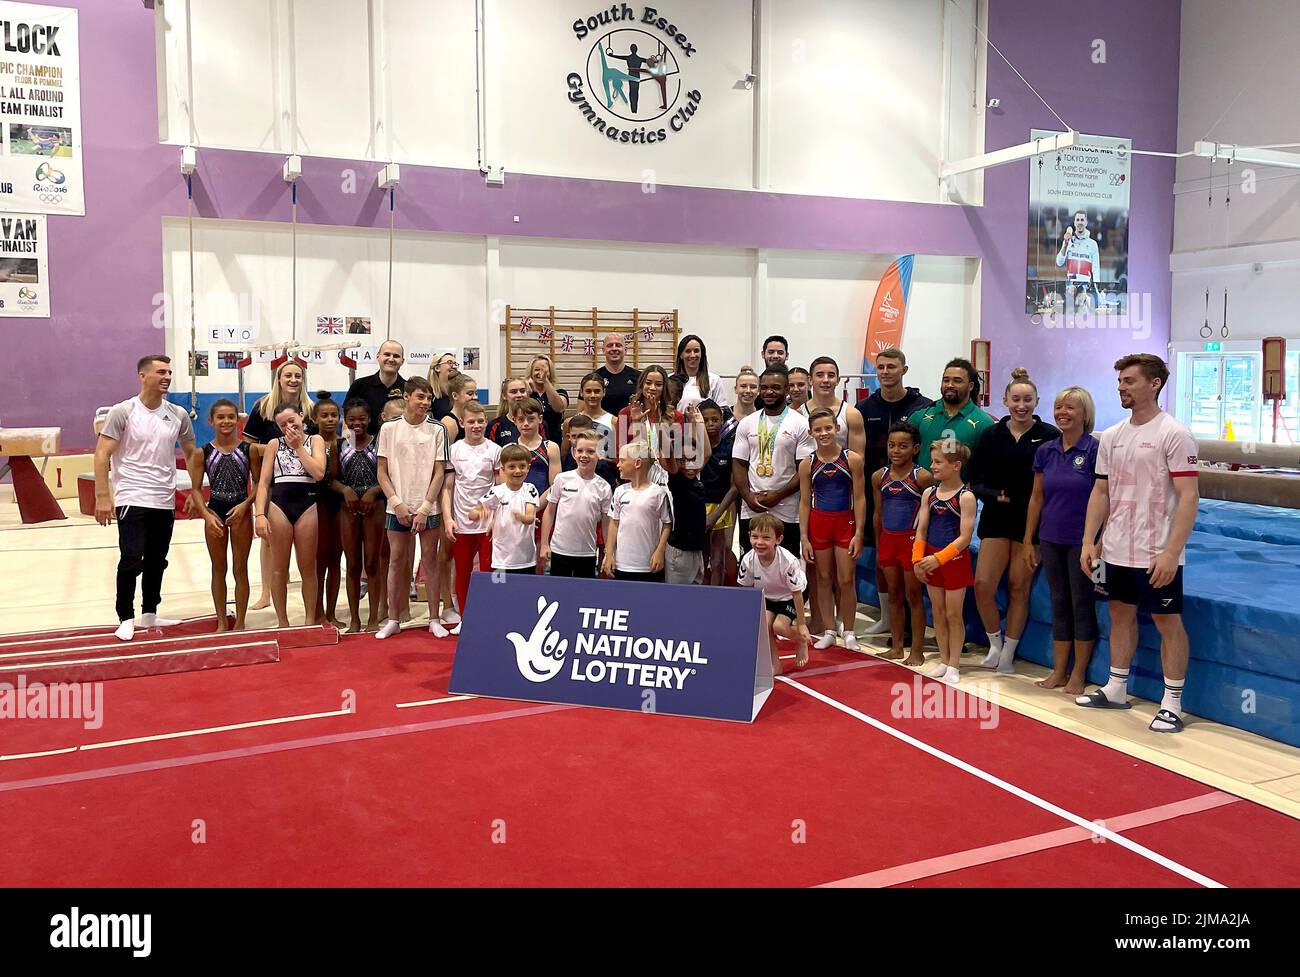 Max Whitlock (left), Georgia-Mae Fenton (centre) and Courtney Tulloch poses for photographers at the South Essex Gymnastics Club, Essex. Picture date: Friday August 5, 2022. Max Whitlock, Courtney Tulloch and Georgia-Mae Fenton surprised a room full of young children who have been supporting Team England throughout the Games. Stock Photo